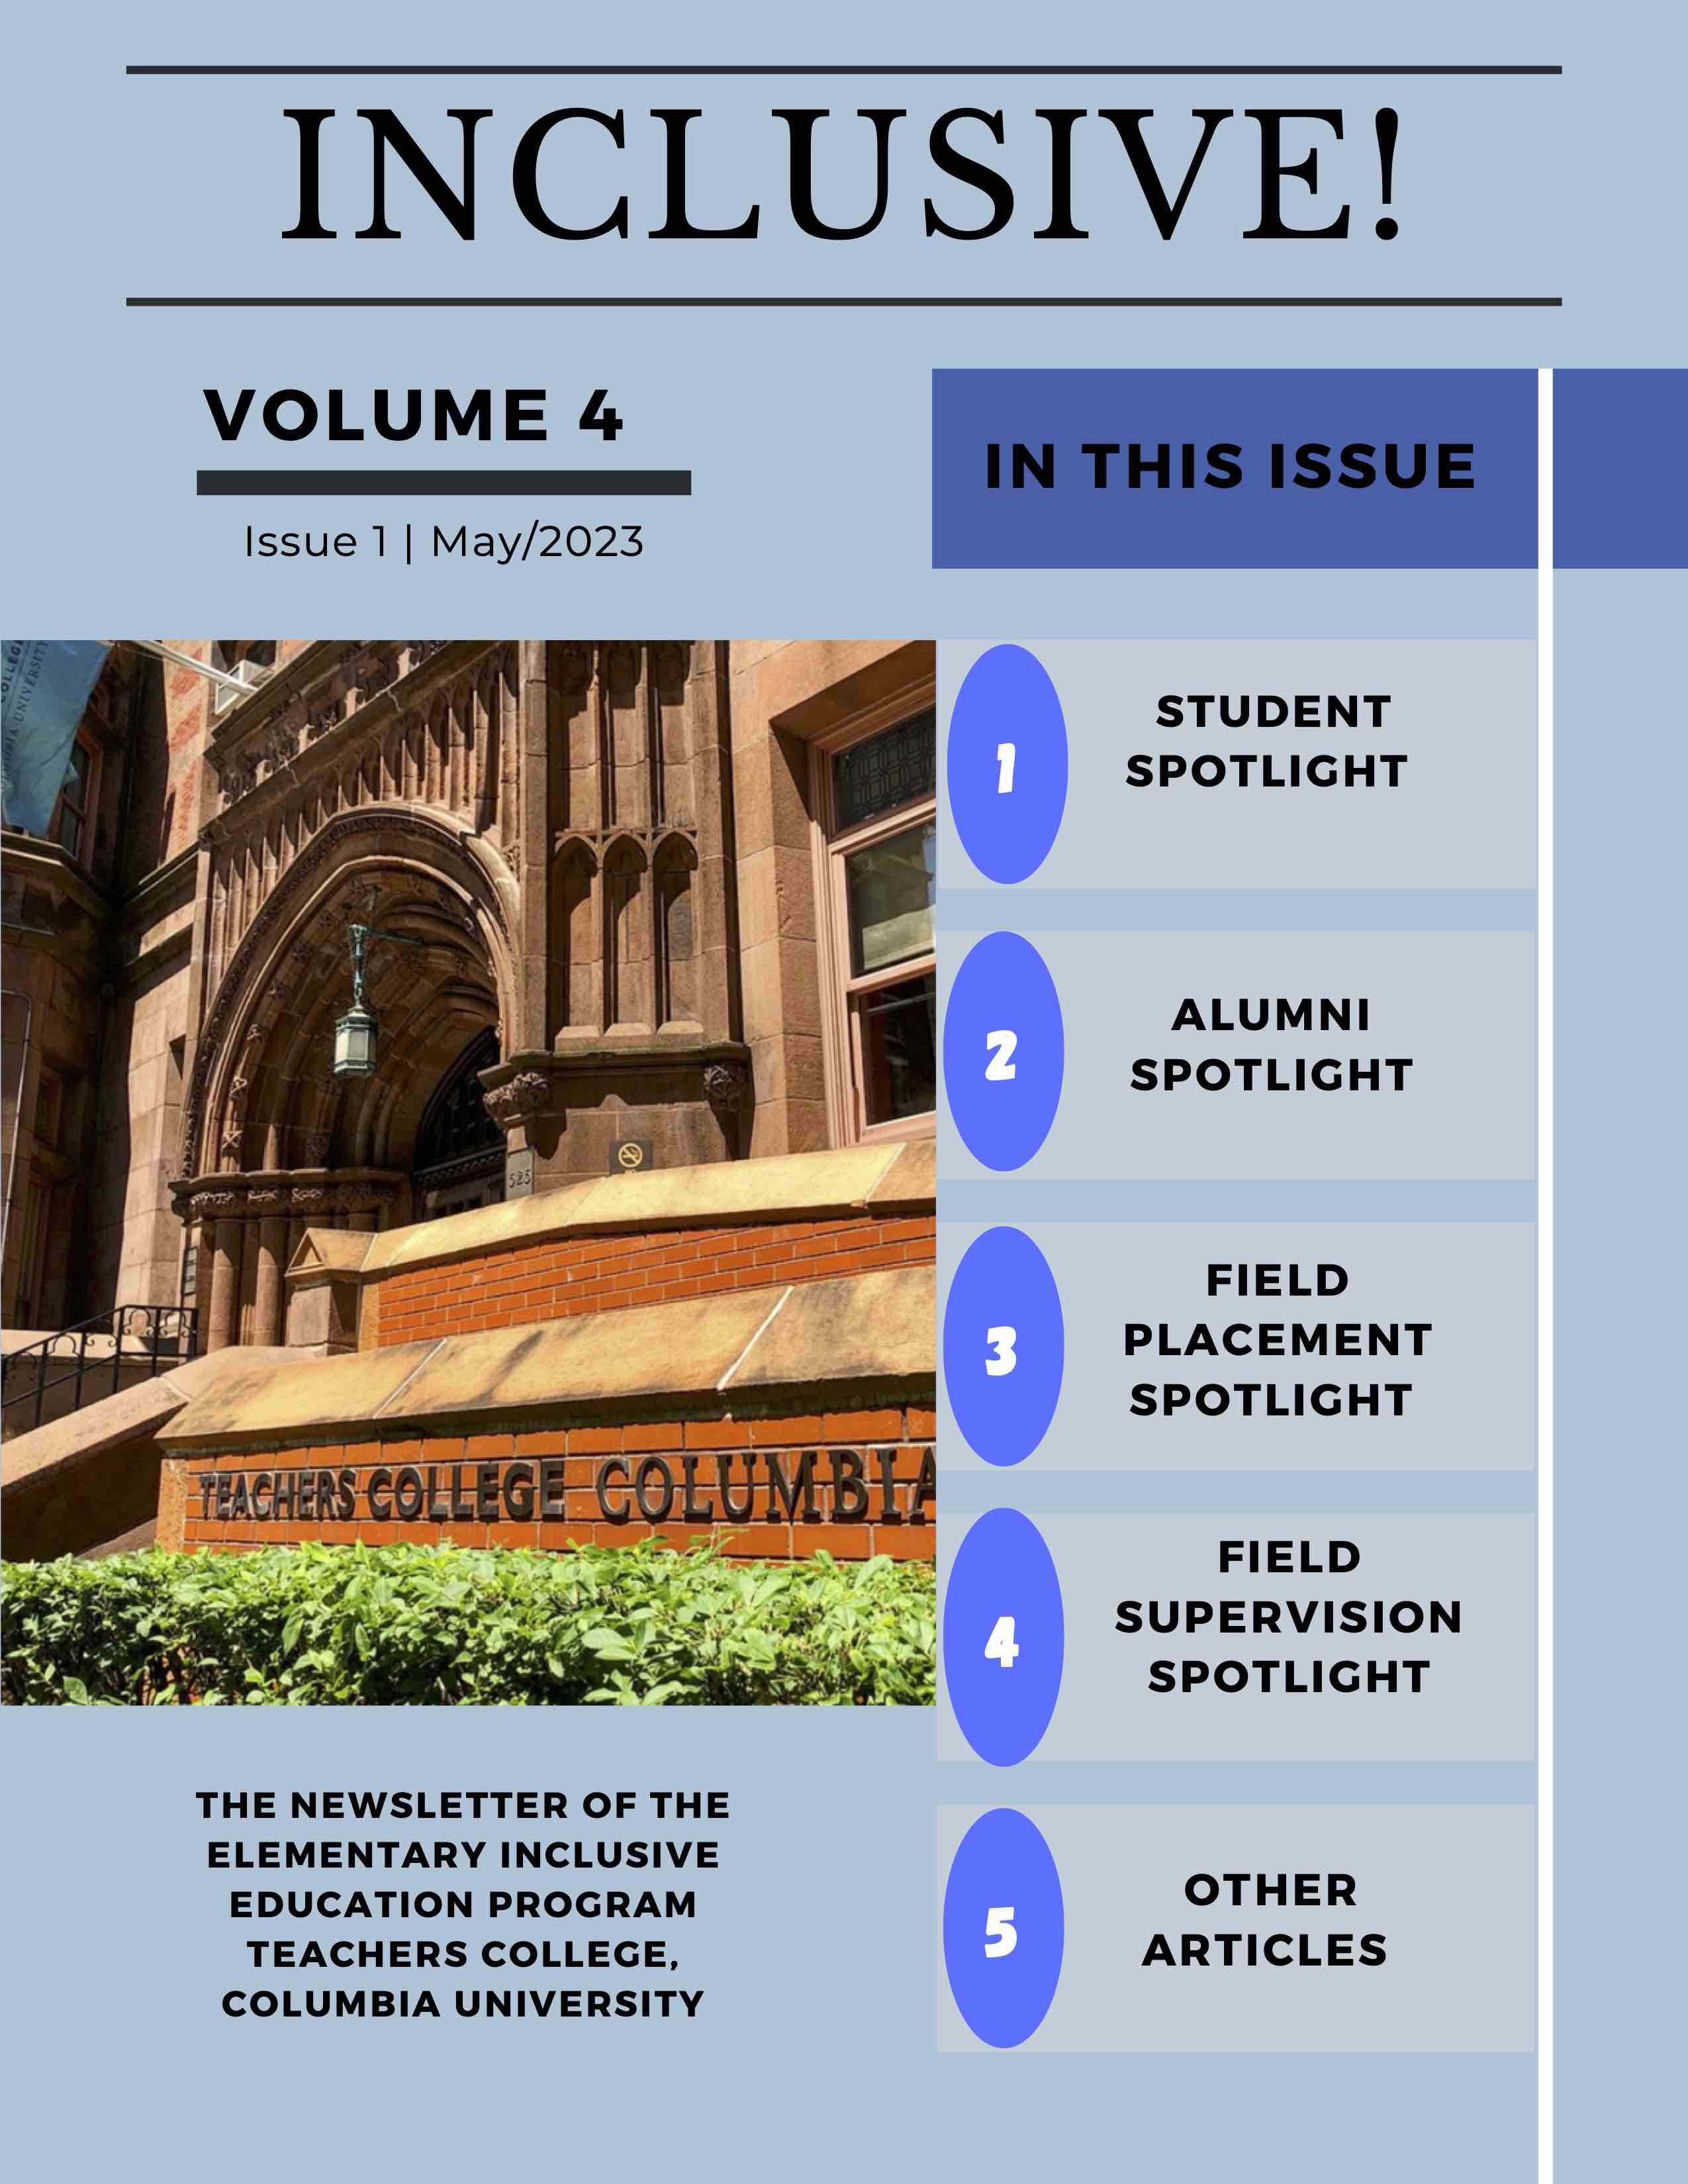 Elementary Inclusive 2023 Newsletter, May 2023 Volume